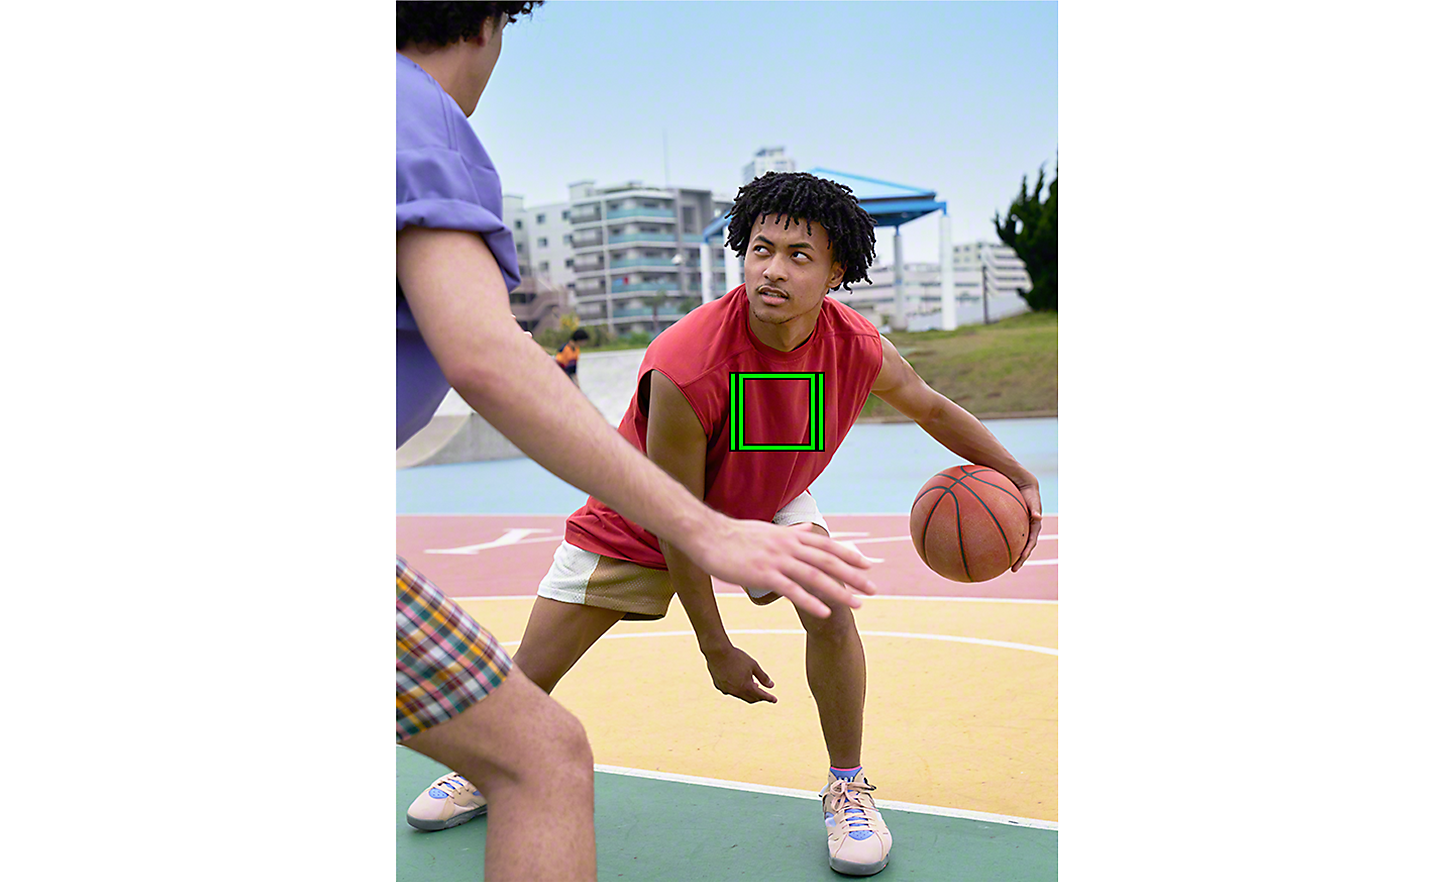 A basketball player eyeing his opponent, a green square on his body denoting Real-time Tracking